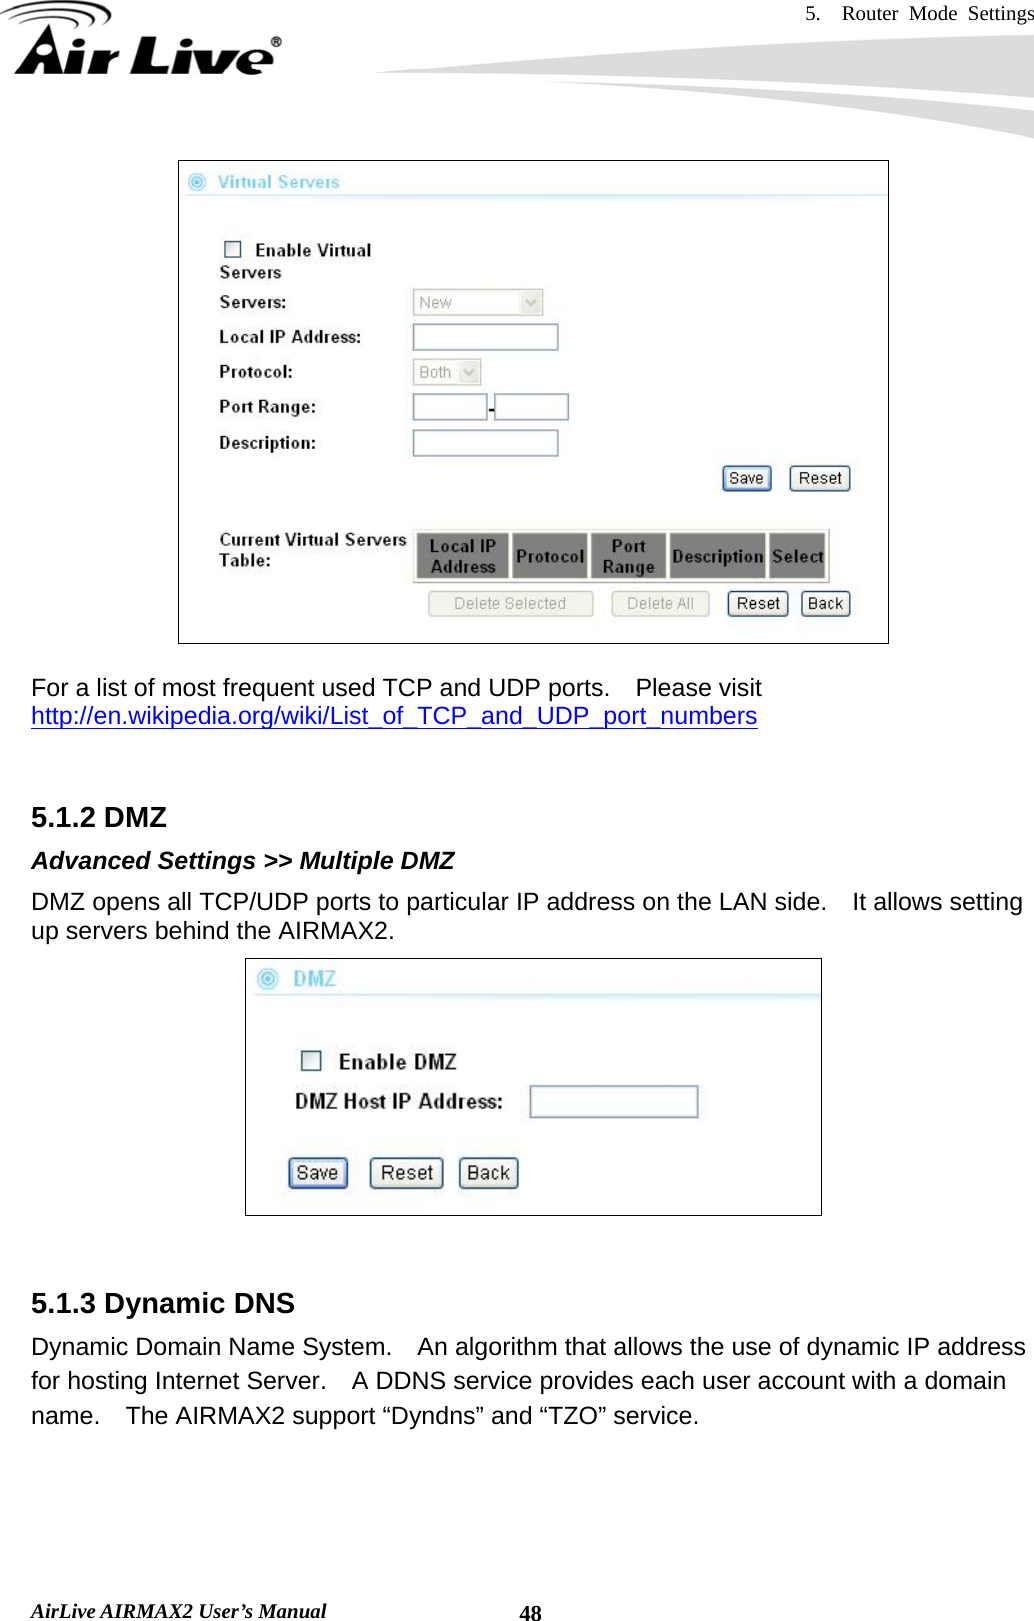 5.  Router Mode Settings    AirLive AIRMAX2 User’s Manual  48  For a list of most frequent used TCP and UDP ports.    Please visit http://en.wikipedia.org/wiki/List_of_TCP_and_UDP_port_numbers   5.1.2 DMZ Advanced Settings &gt;&gt; Multiple DMZ DMZ opens all TCP/UDP ports to particular IP address on the LAN side.    It allows setting up servers behind the AIRMAX2.    5.1.3 Dynamic DNS Dynamic Domain Name System.    An algorithm that allows the use of dynamic IP address for hosting Internet Server.    A DDNS service provides each user account with a domain name.    The AIRMAX2 support “Dyndns” and “TZO” service.  